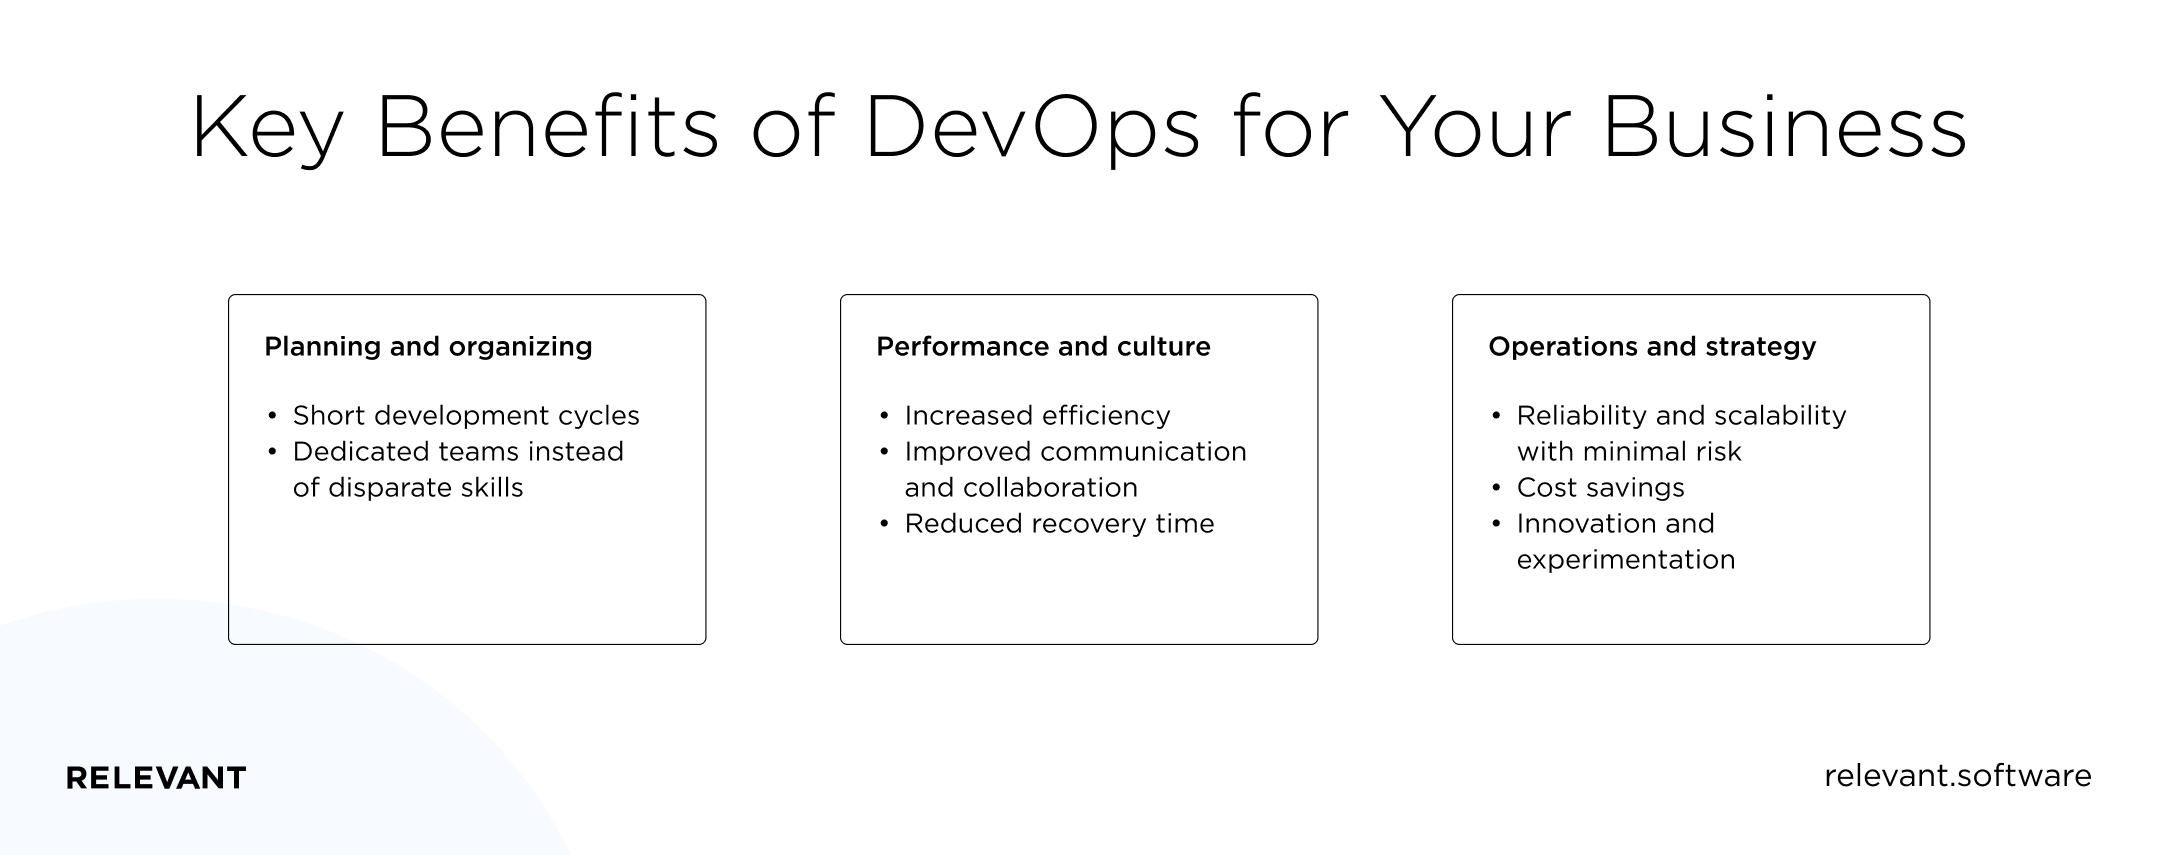 Key Benefits of DevOps for Your Business